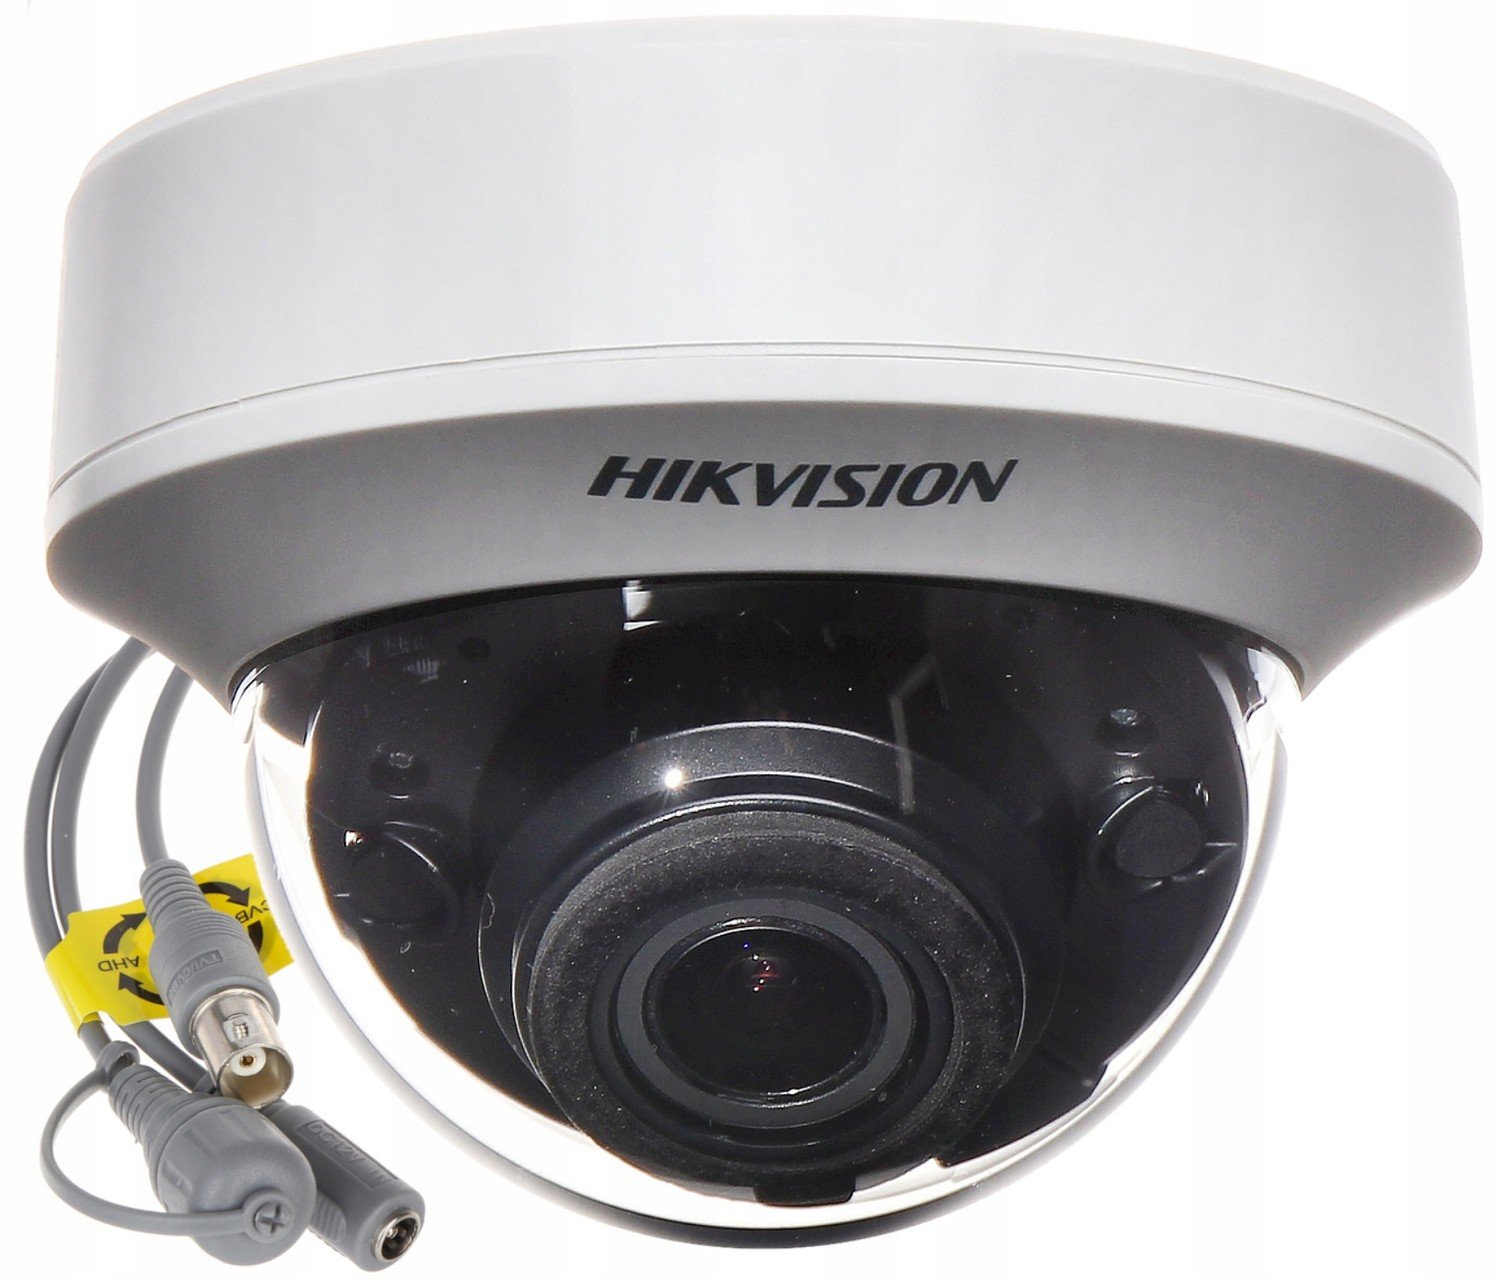 Kamera DS-2CE56H0T-ITZF(2.7-13.5mm) 5MP Hikvision